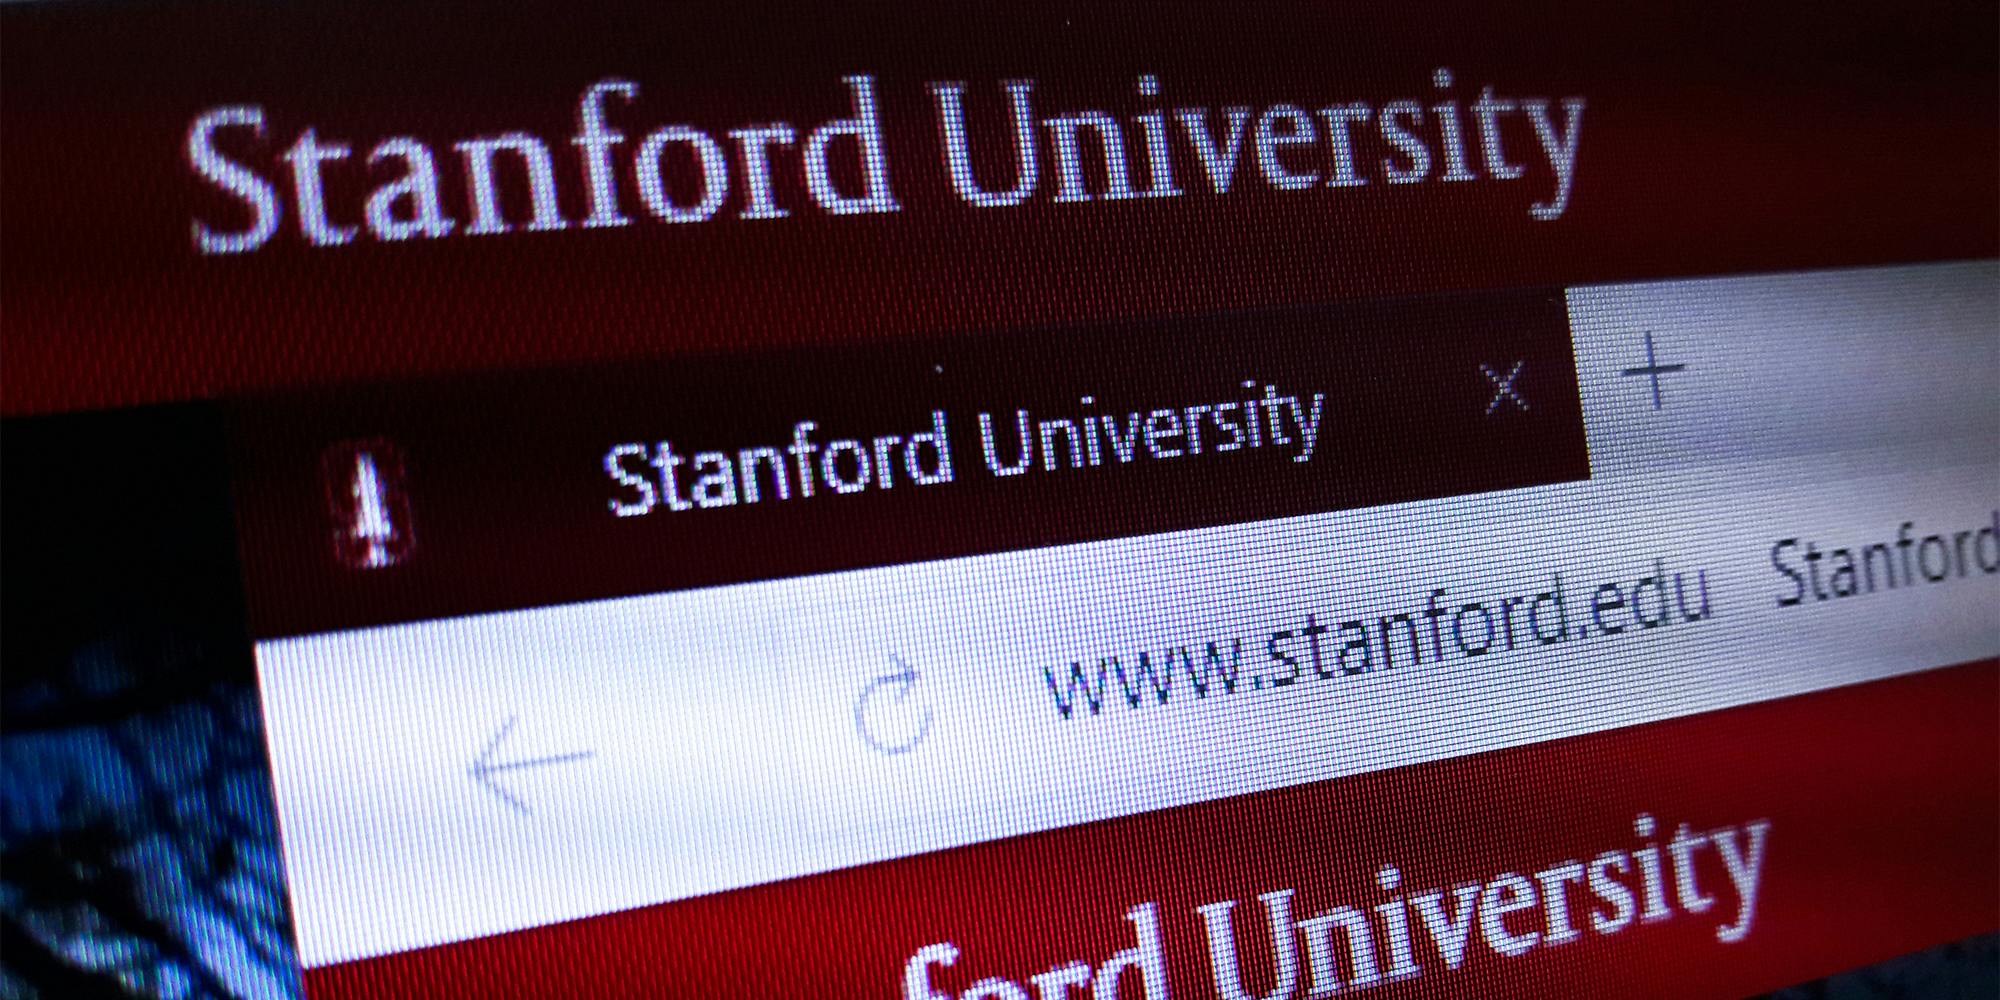 The homepage of the official website for Stanford University, a private research university in Stanford, California.